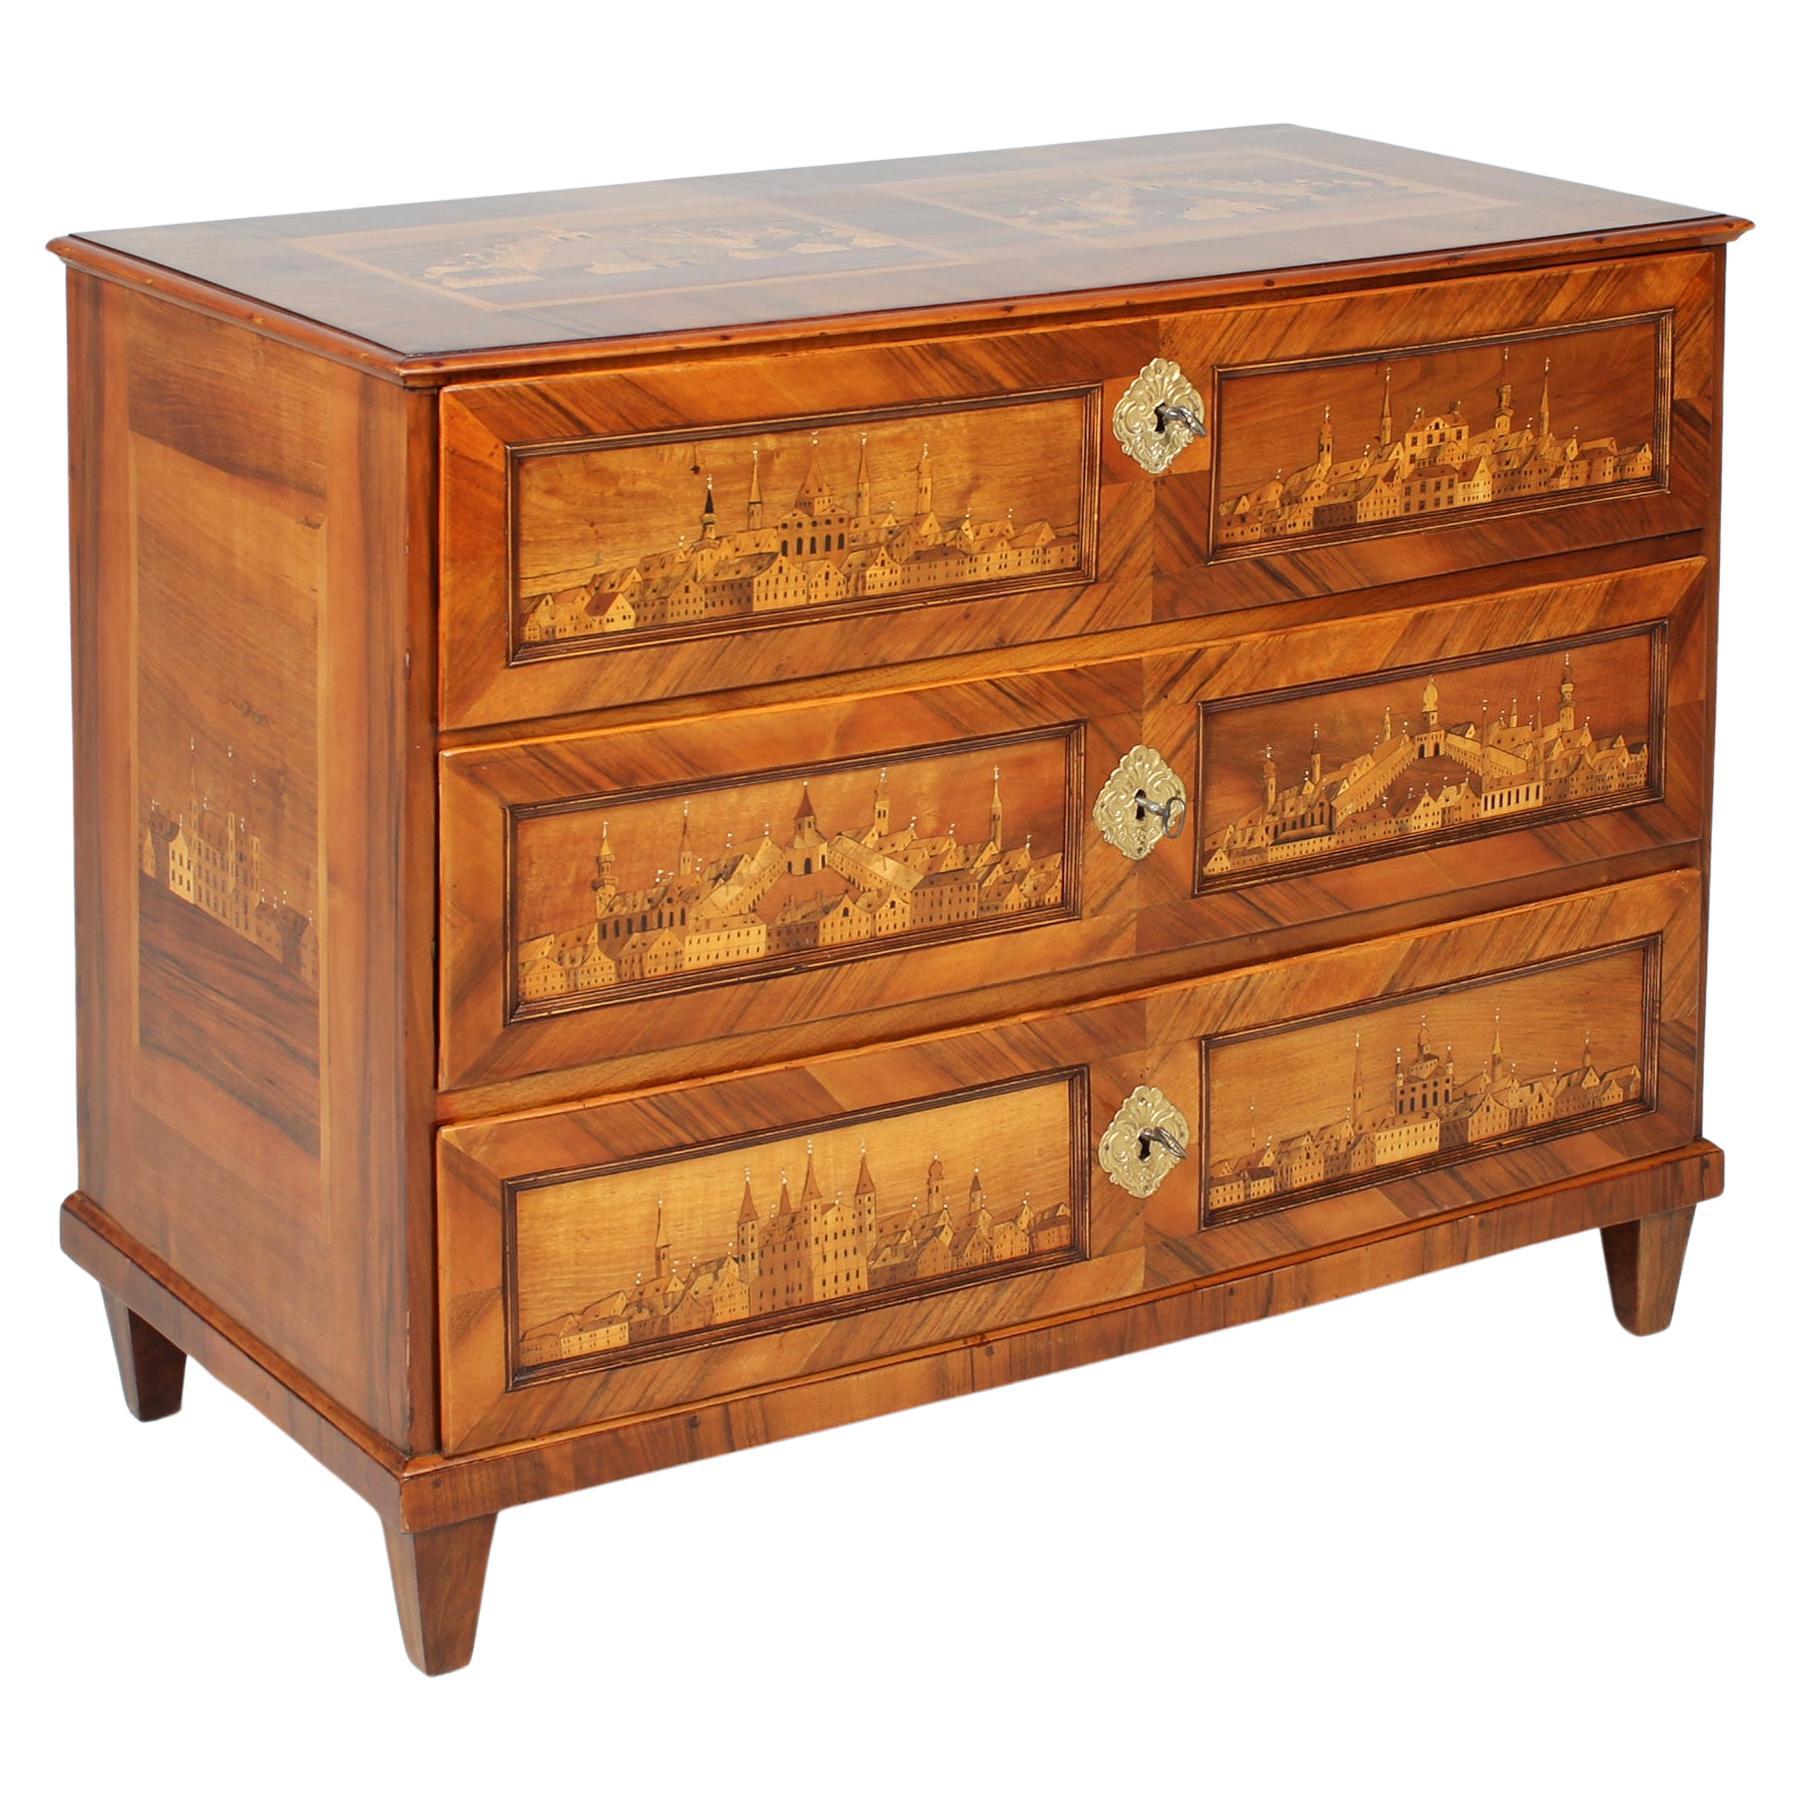 Early 19th Century Italian Louis XVI Chest of Drawers with Fantastic Marquetry